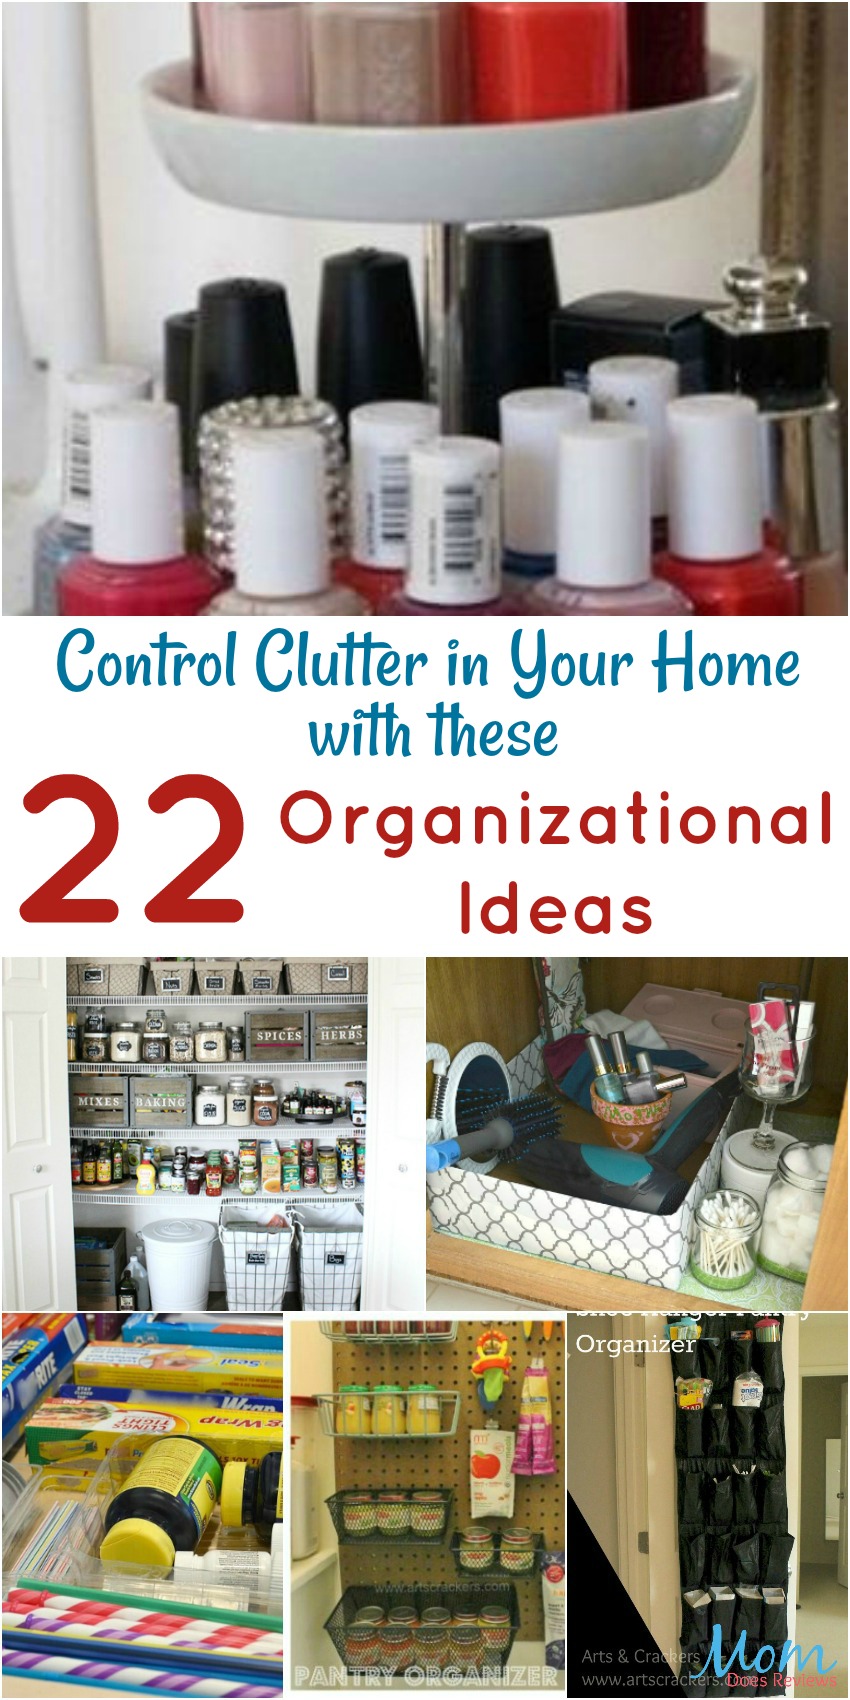 22 Organizational Ideas to Control Clutter in Your Home